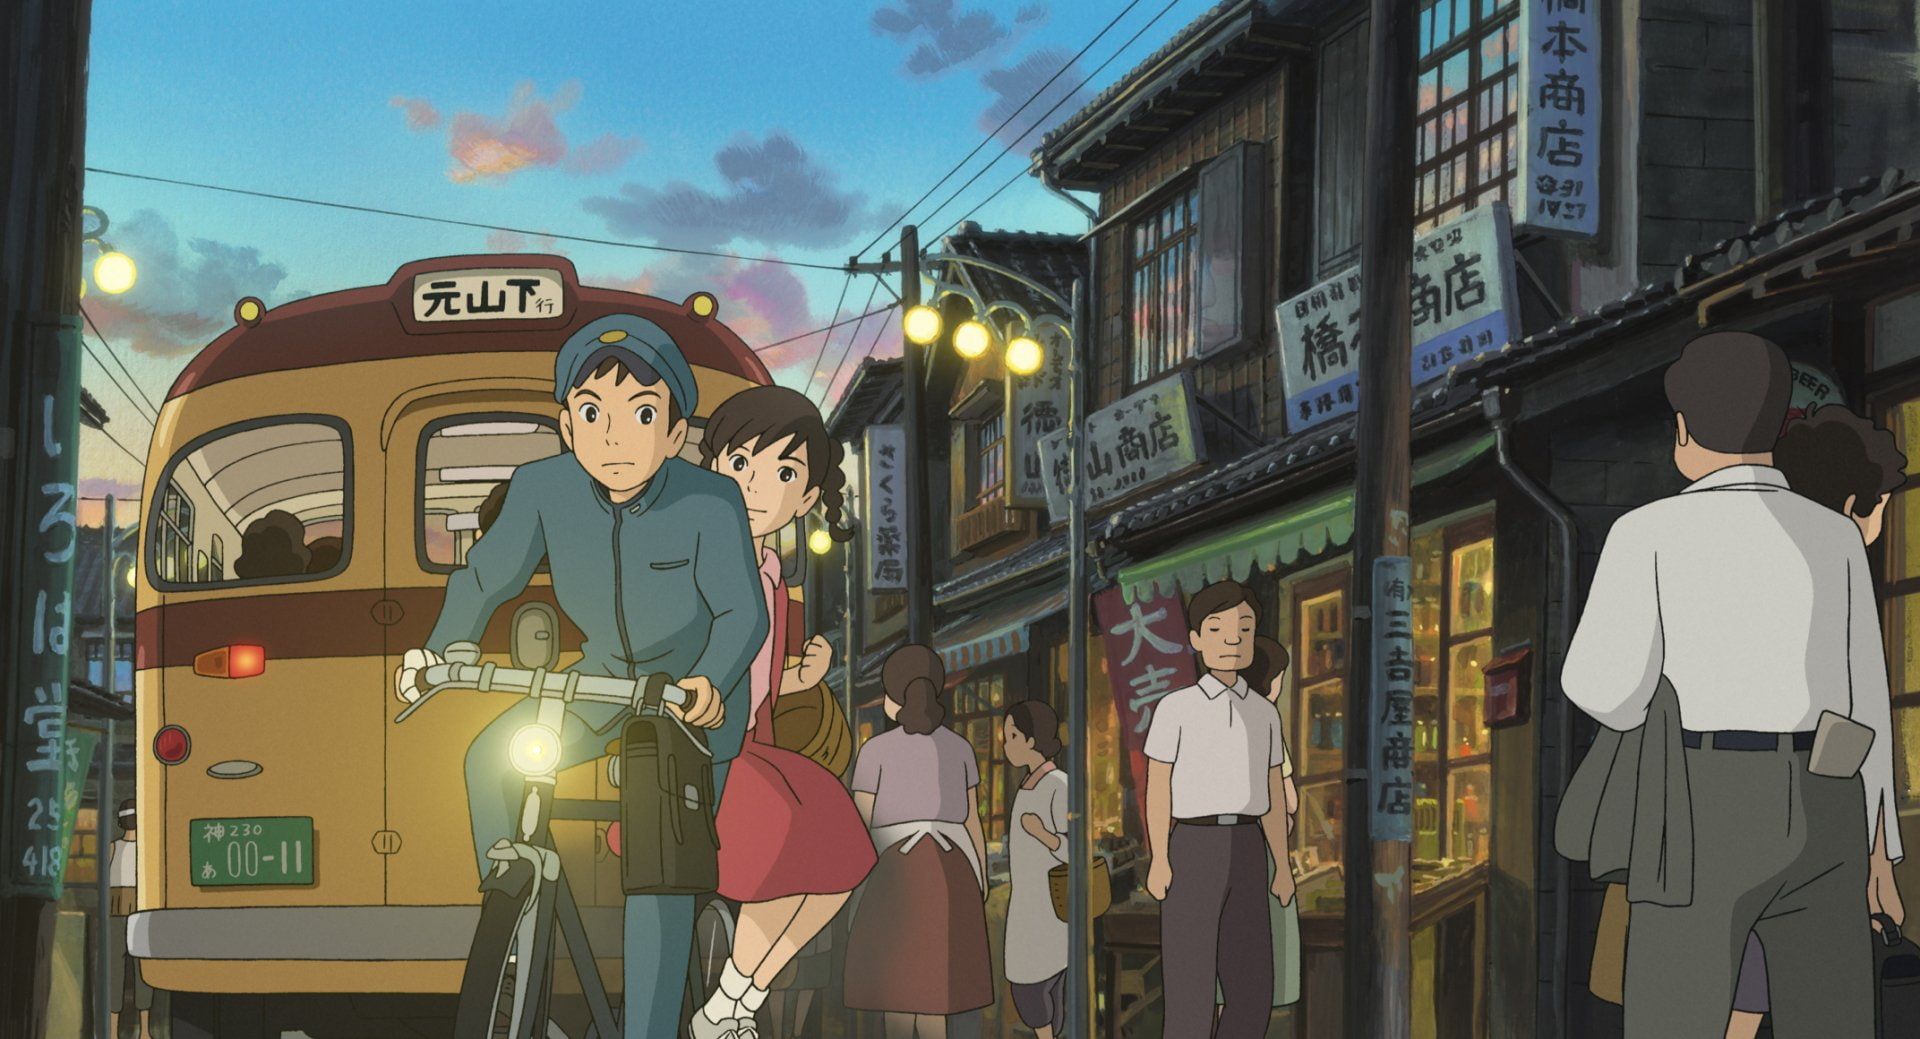 21 Anime Like The Wind Rises: An Animated Masterpiece 